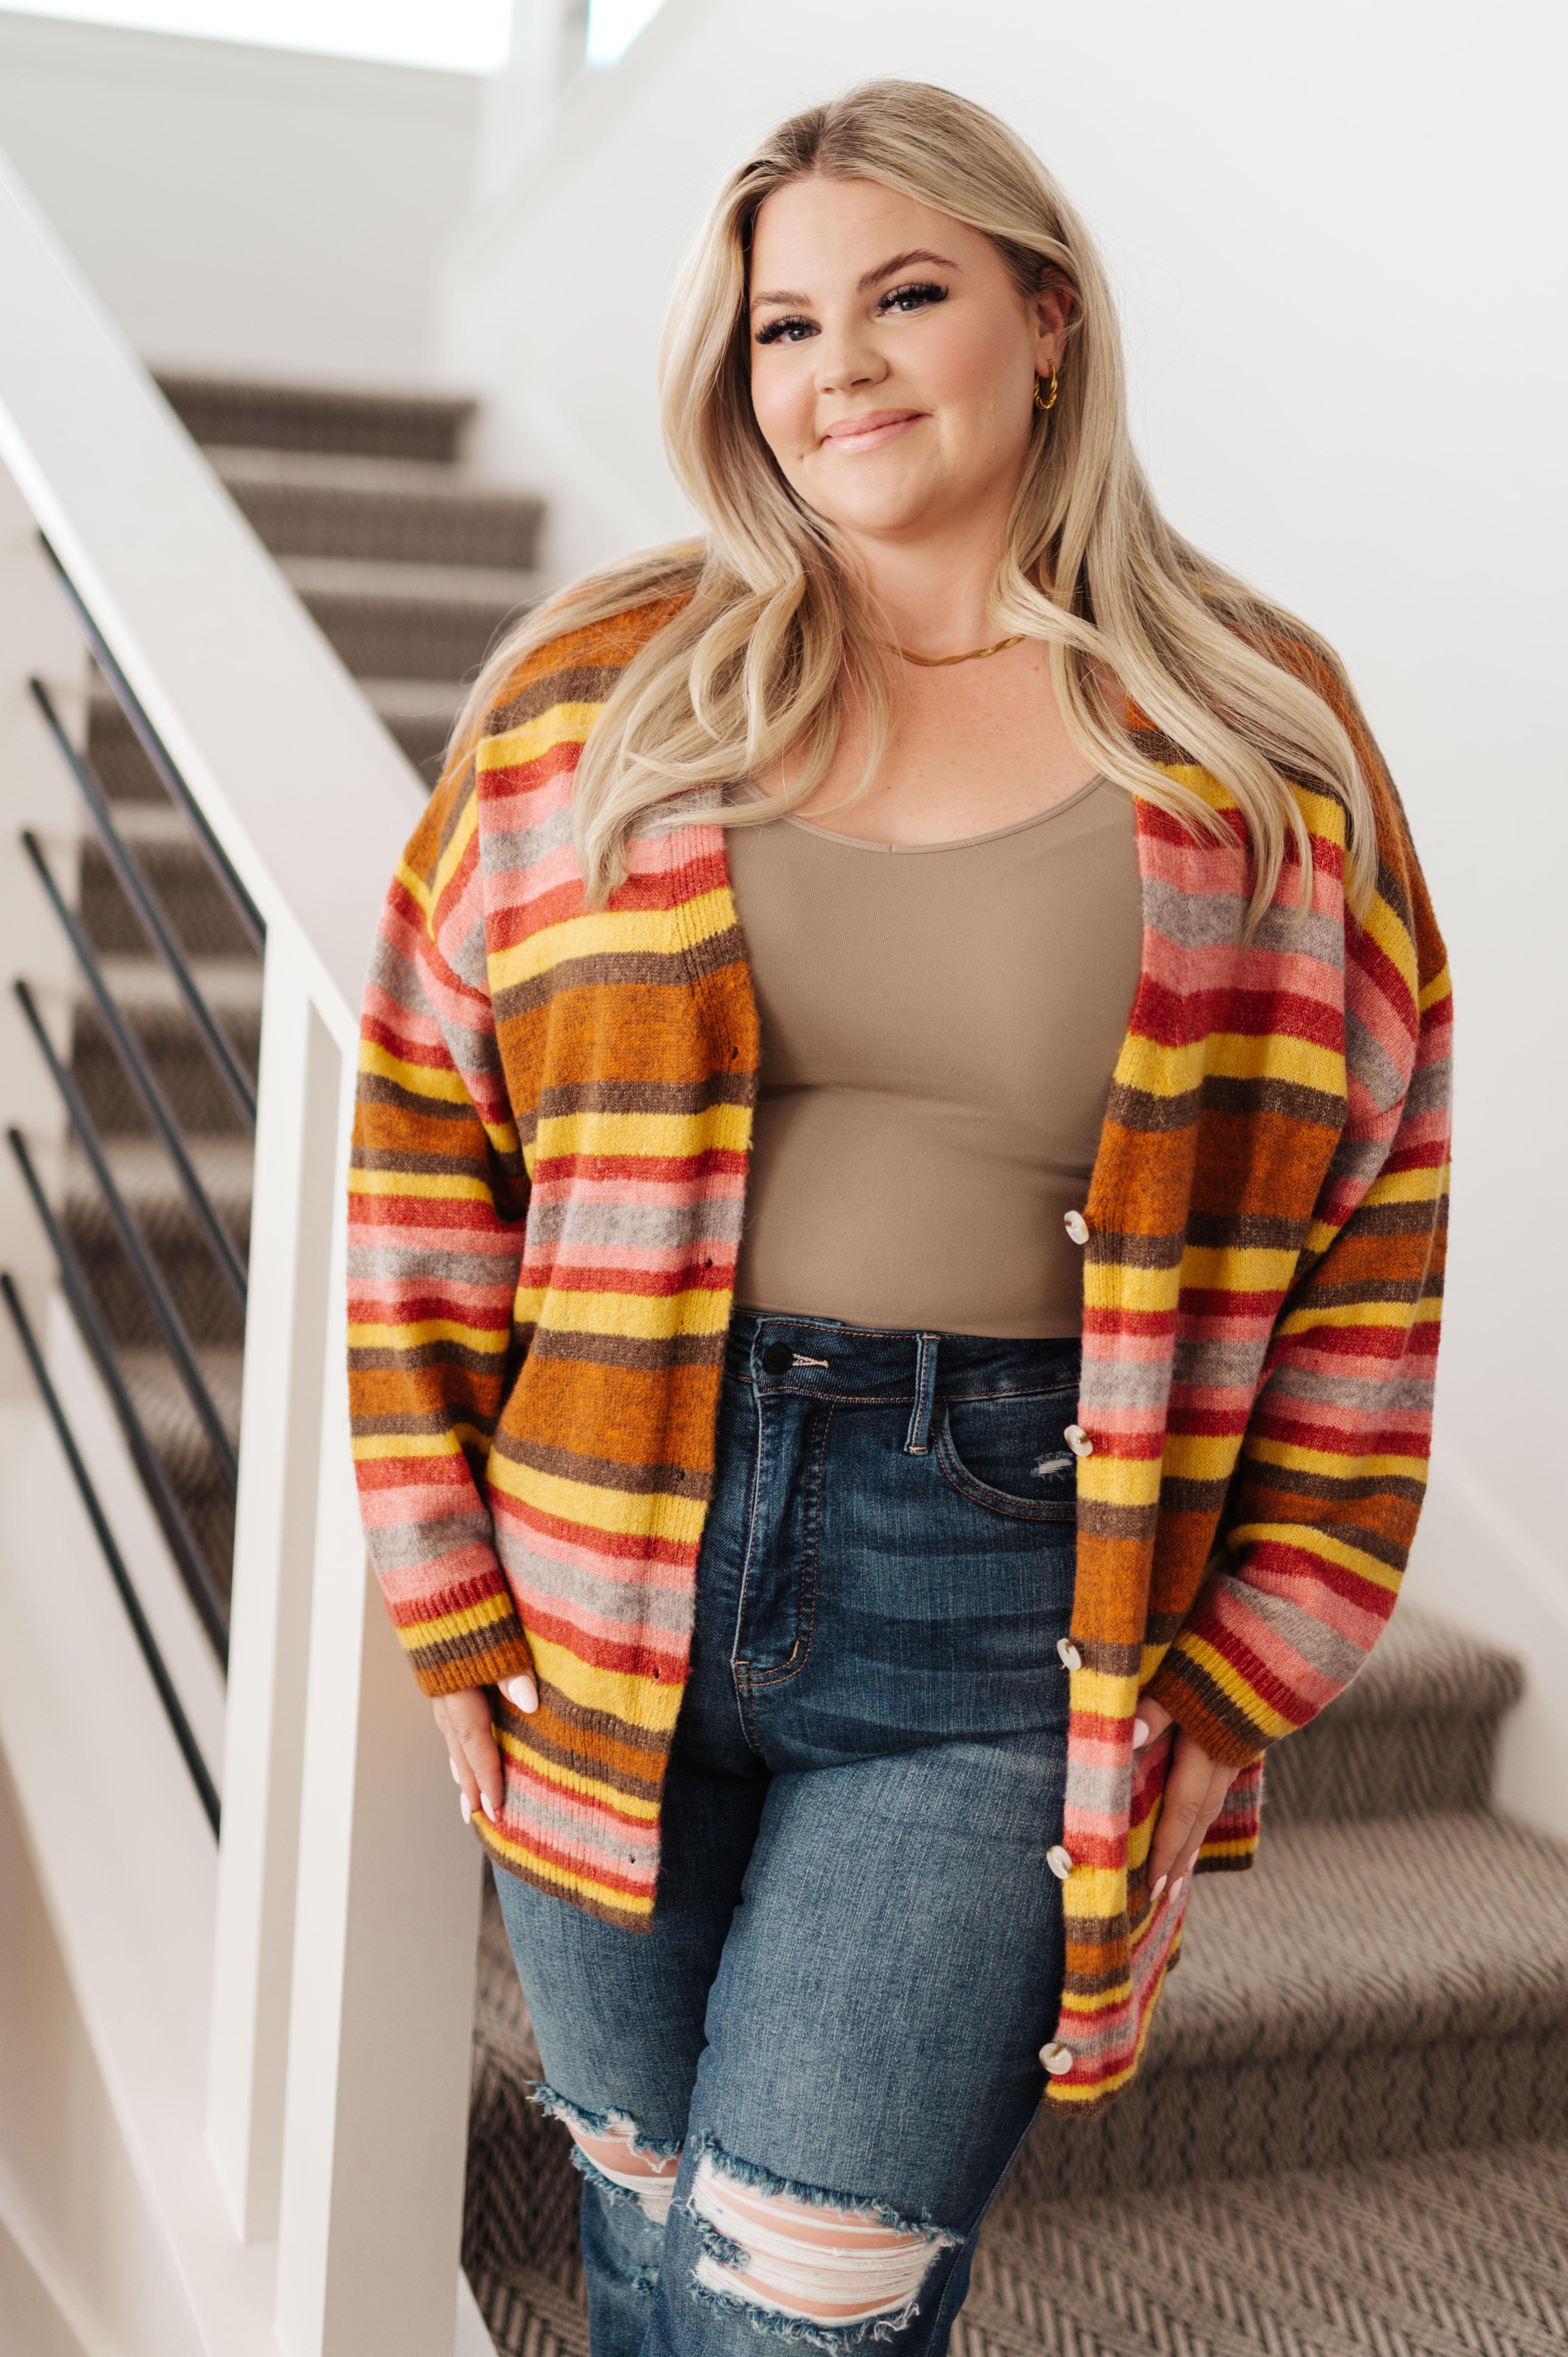 Henny Penny Striped Cardigan Womens Ave Shops   